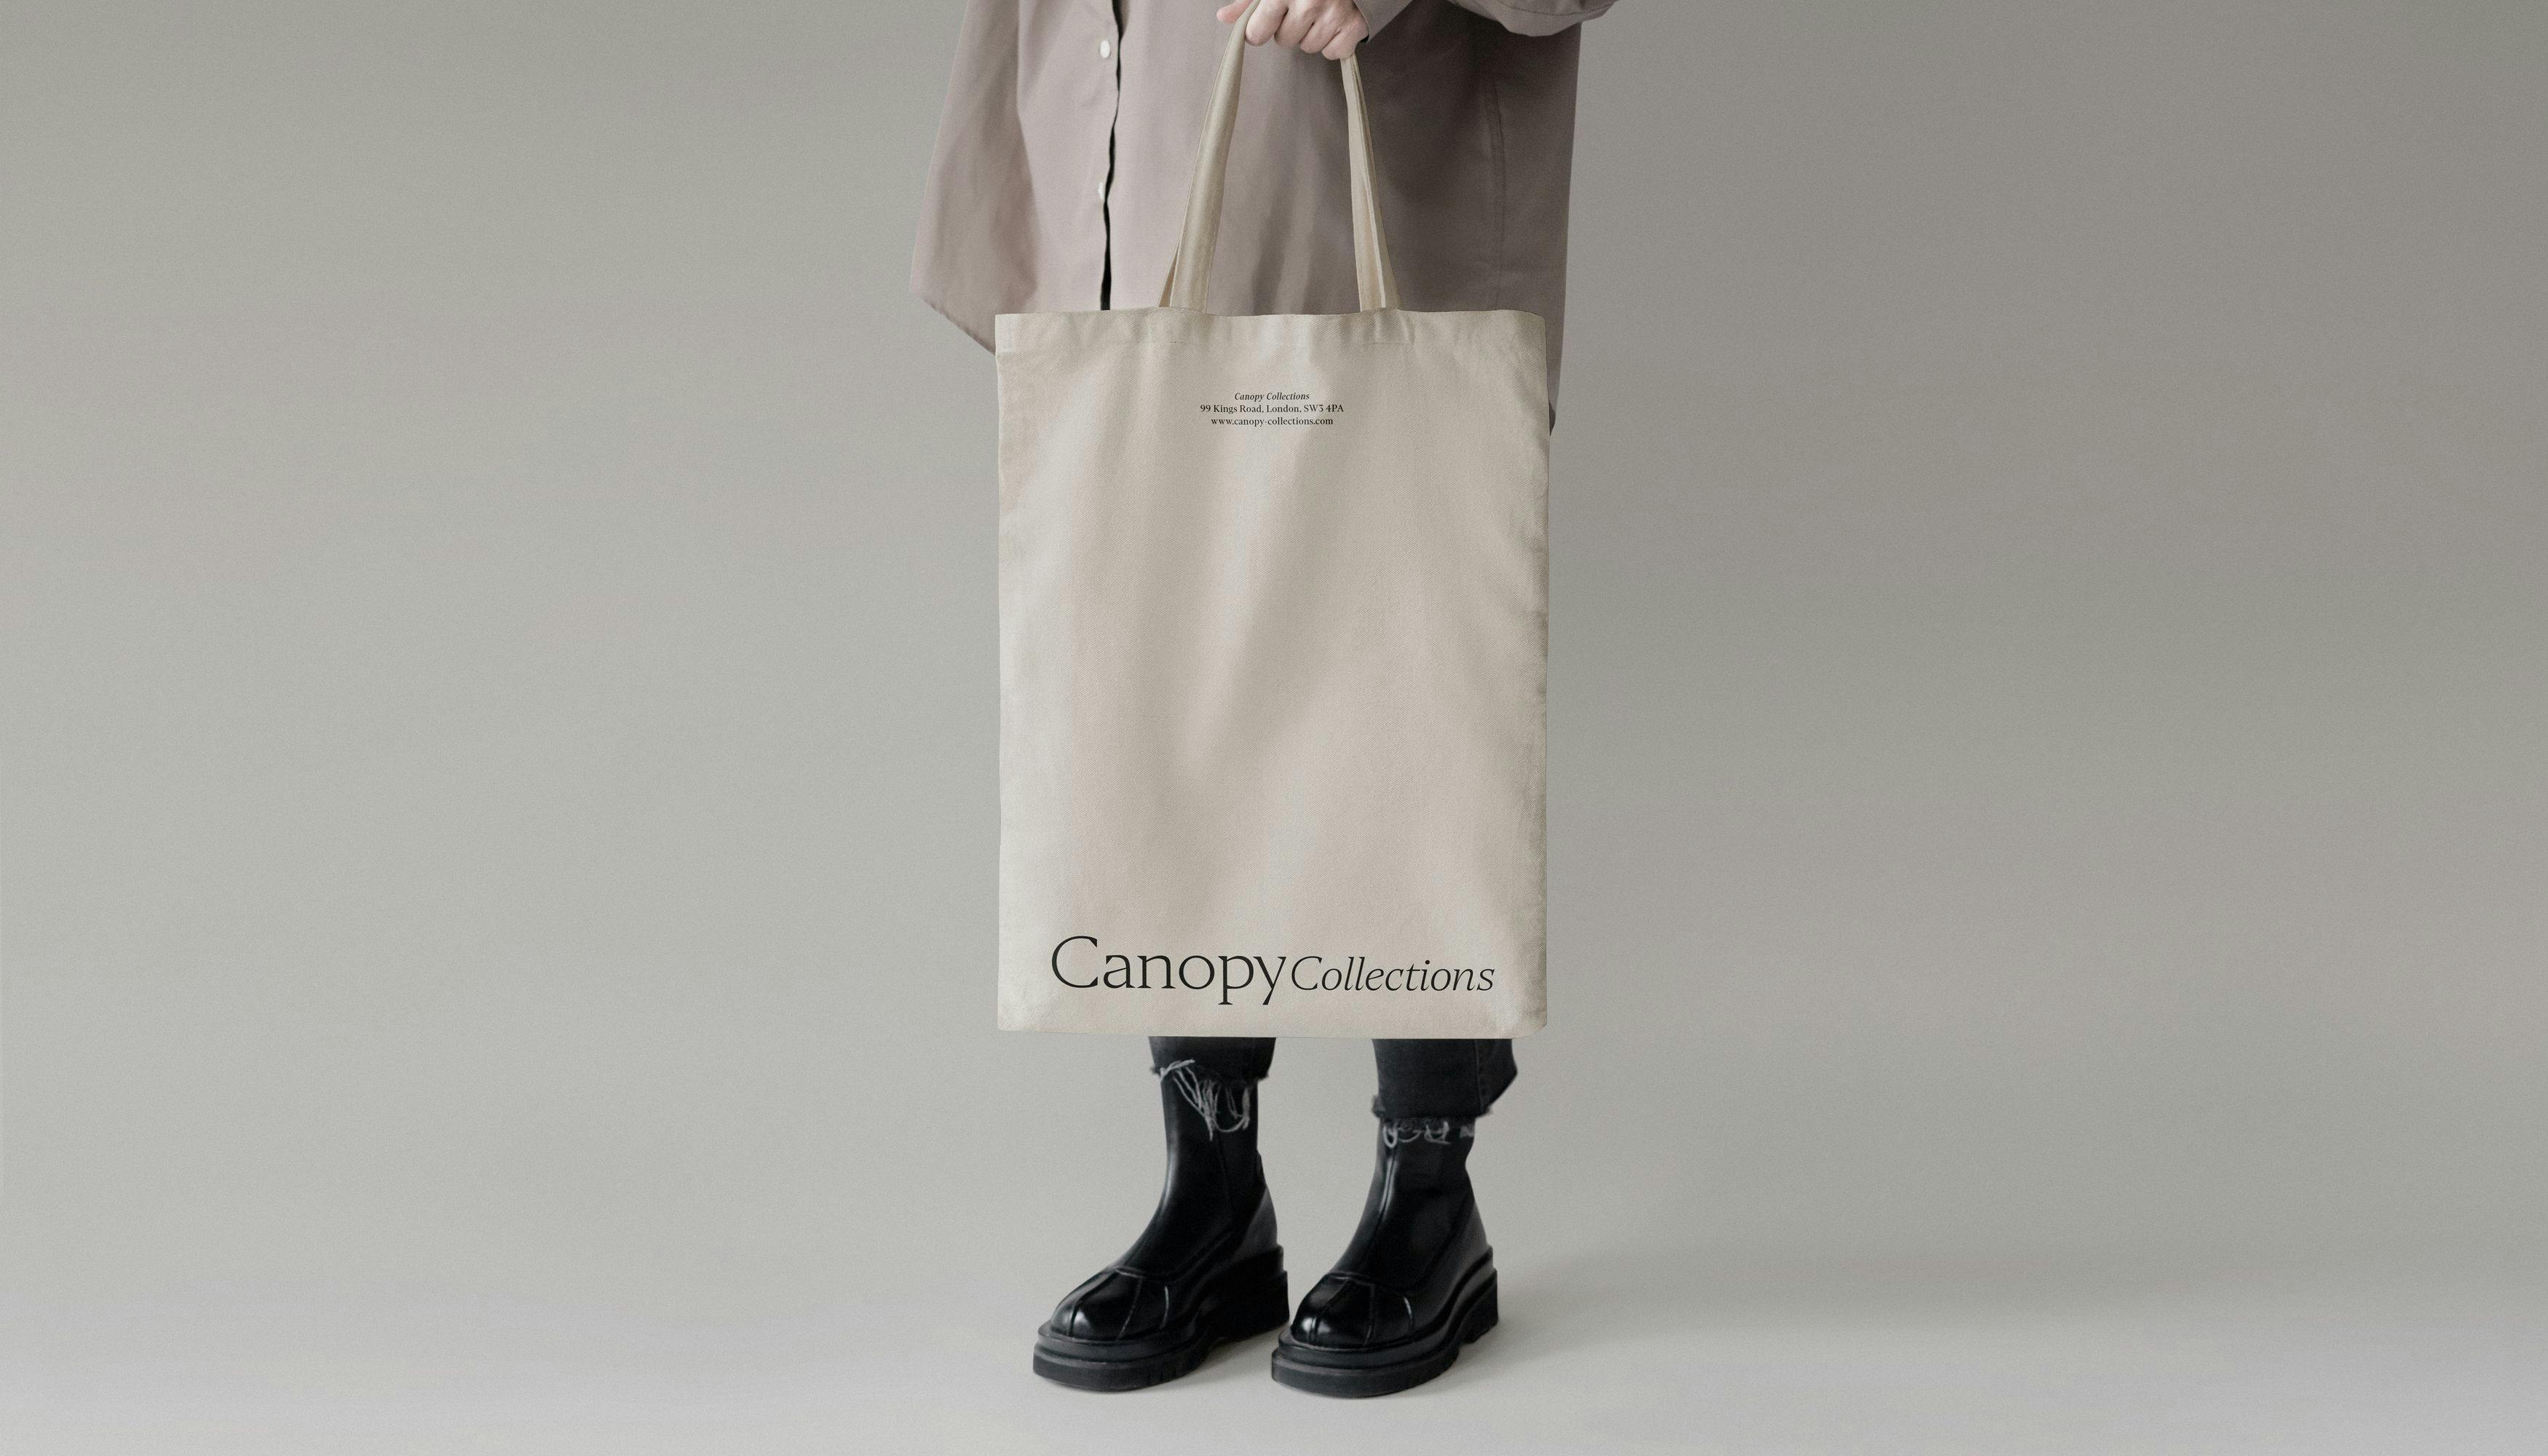 Cover image from Canopy Collections